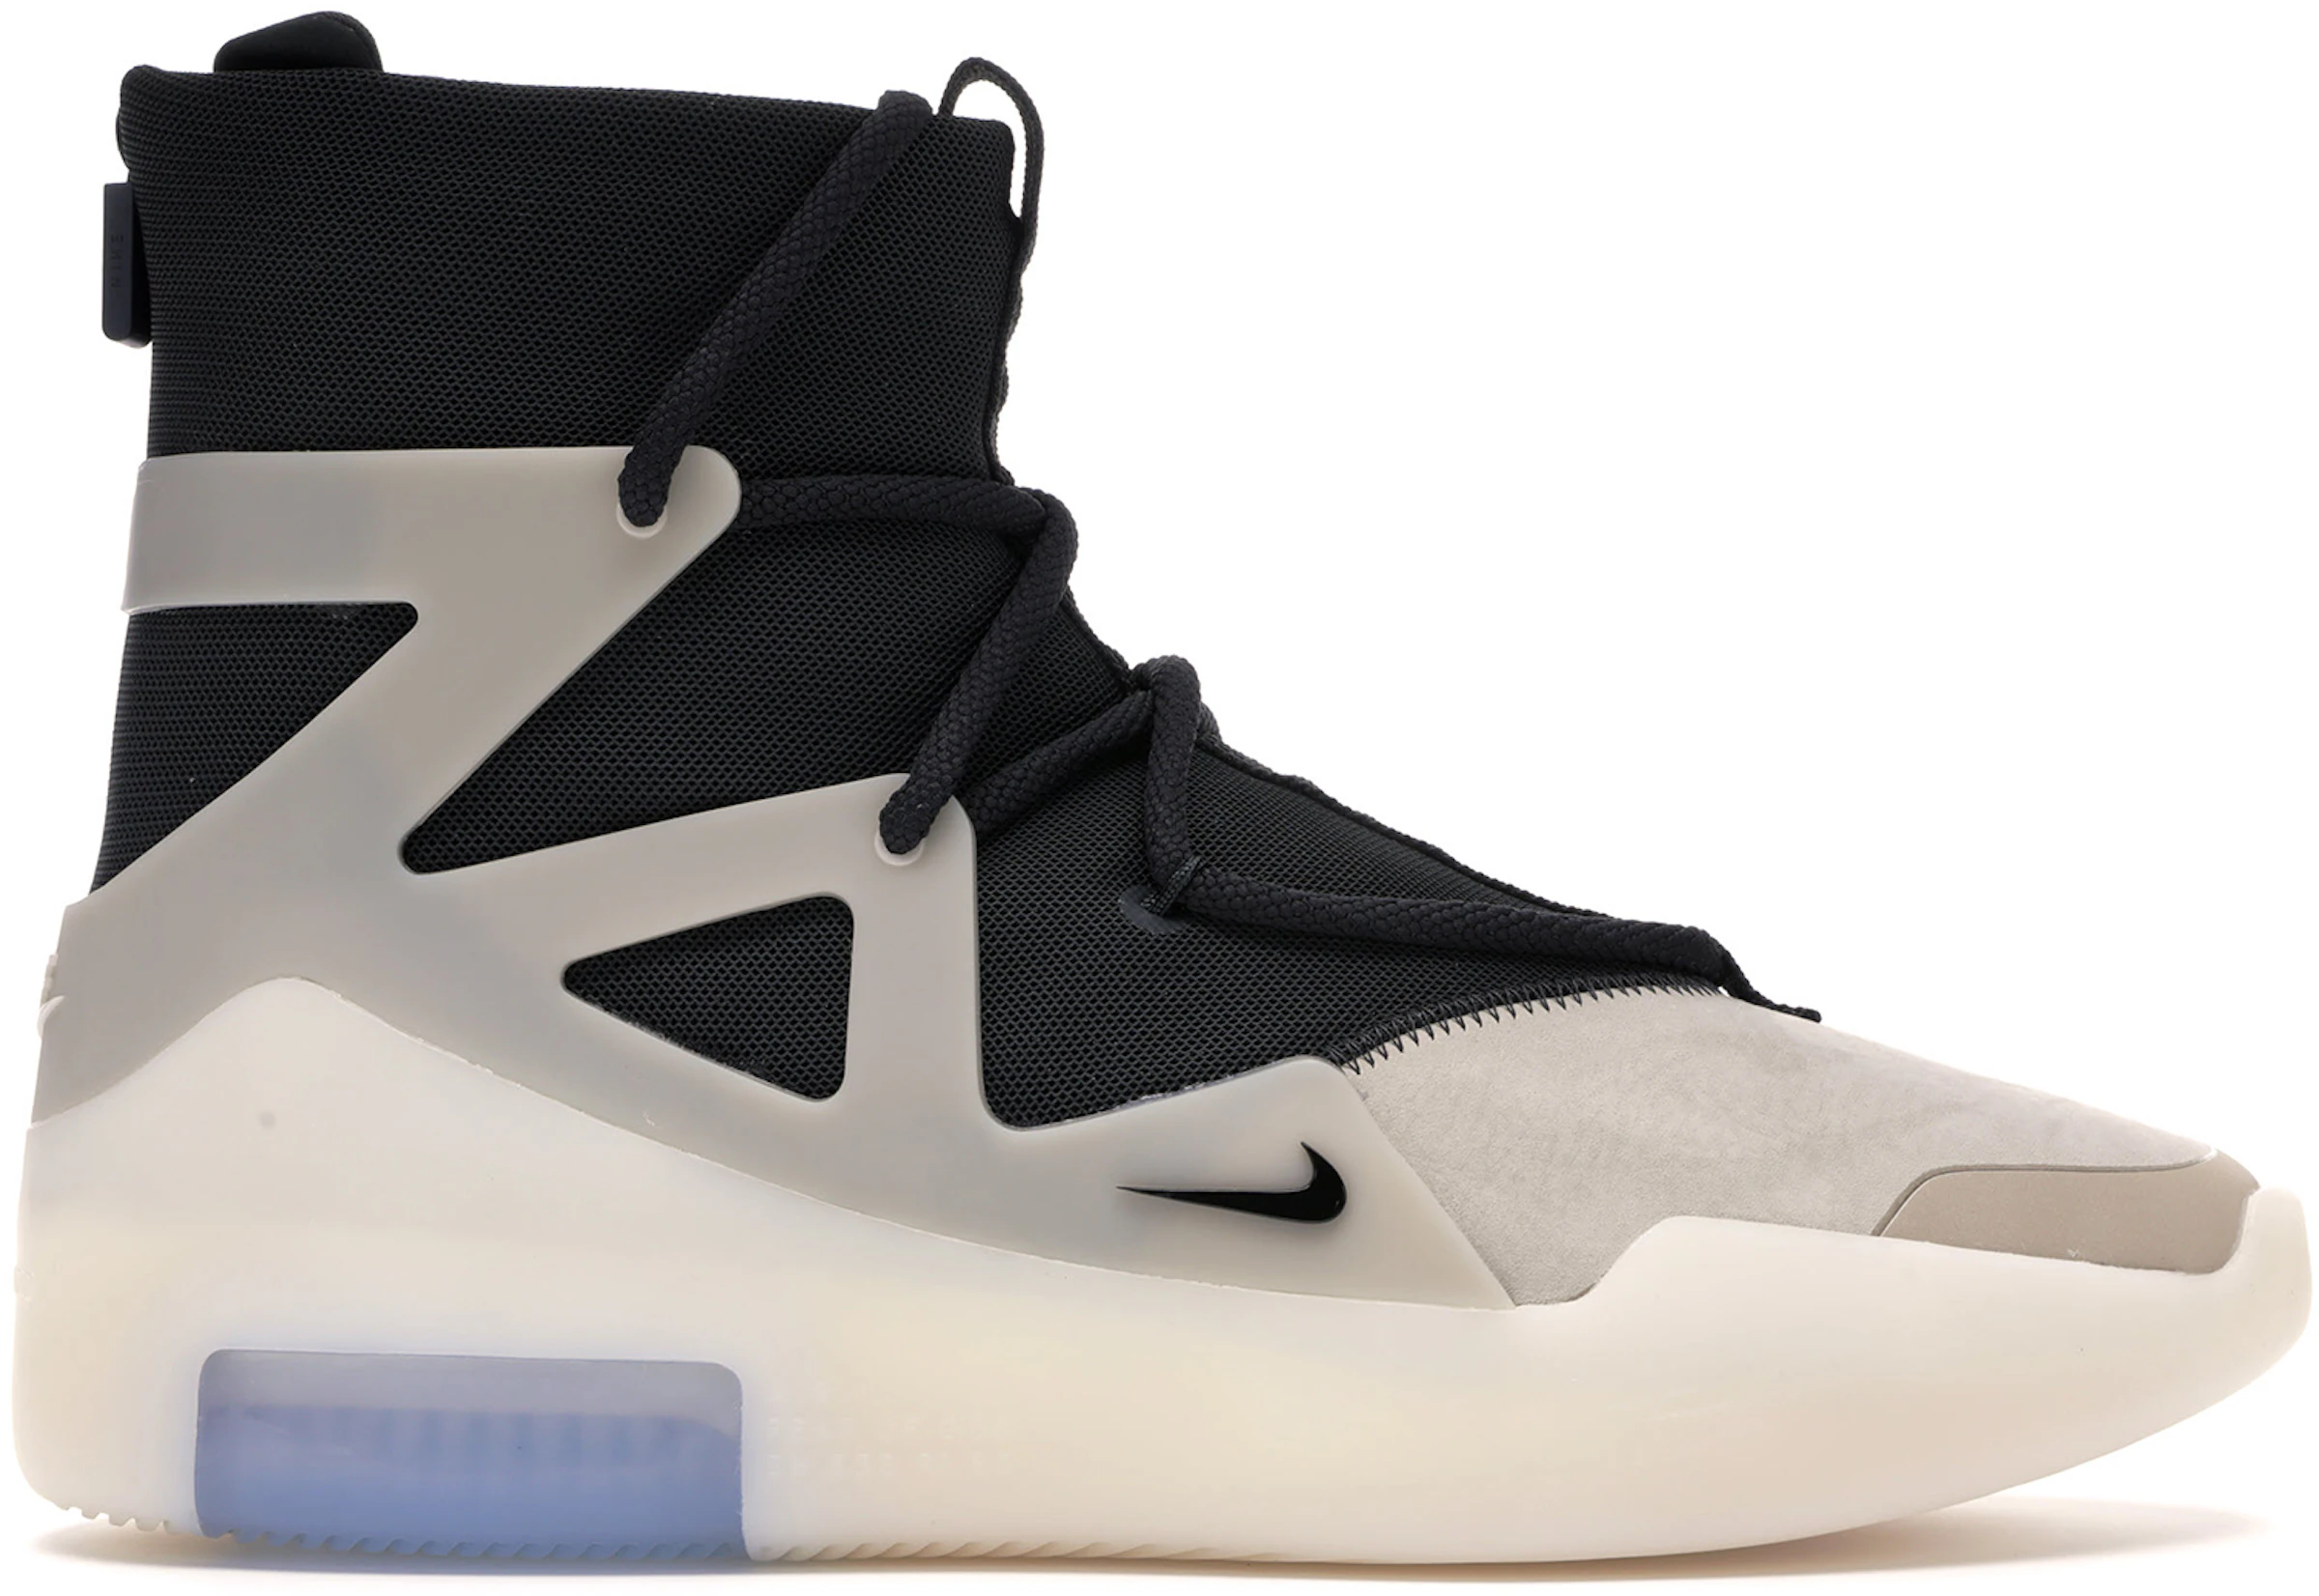 Nike Fear of God 1 String The Question - - US